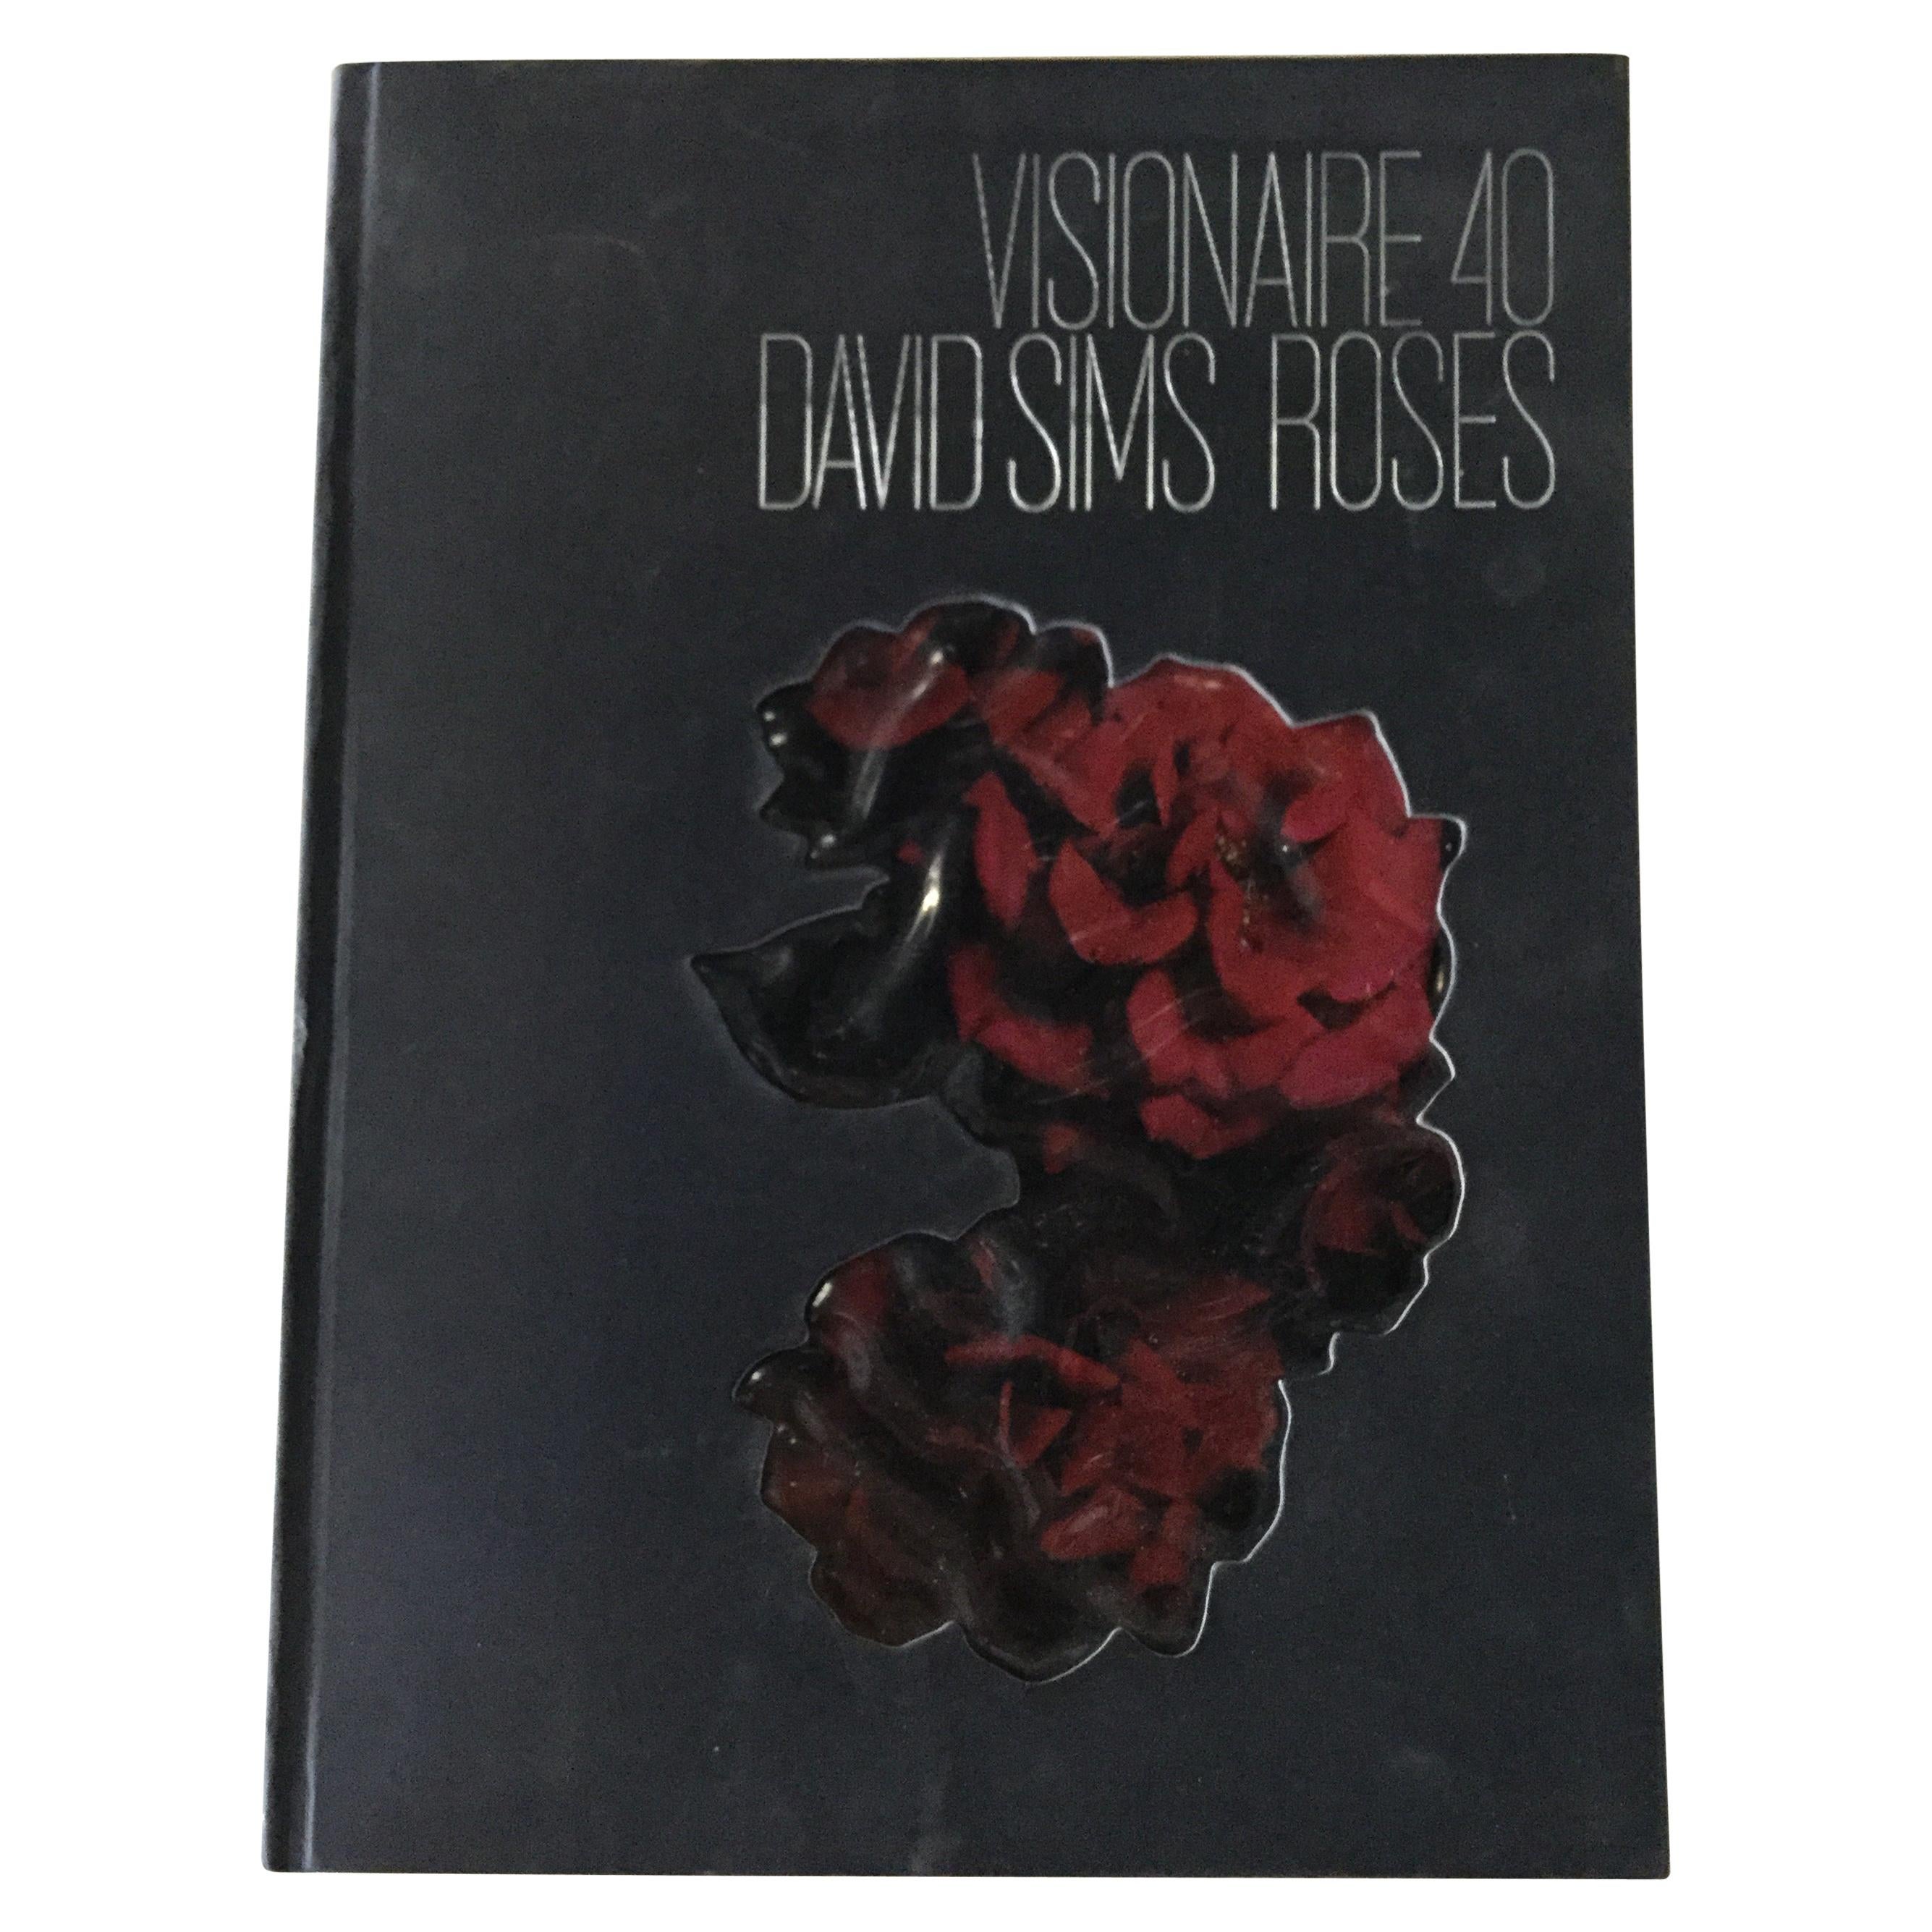 Visionaire Number 40 “Roses” by David Simms